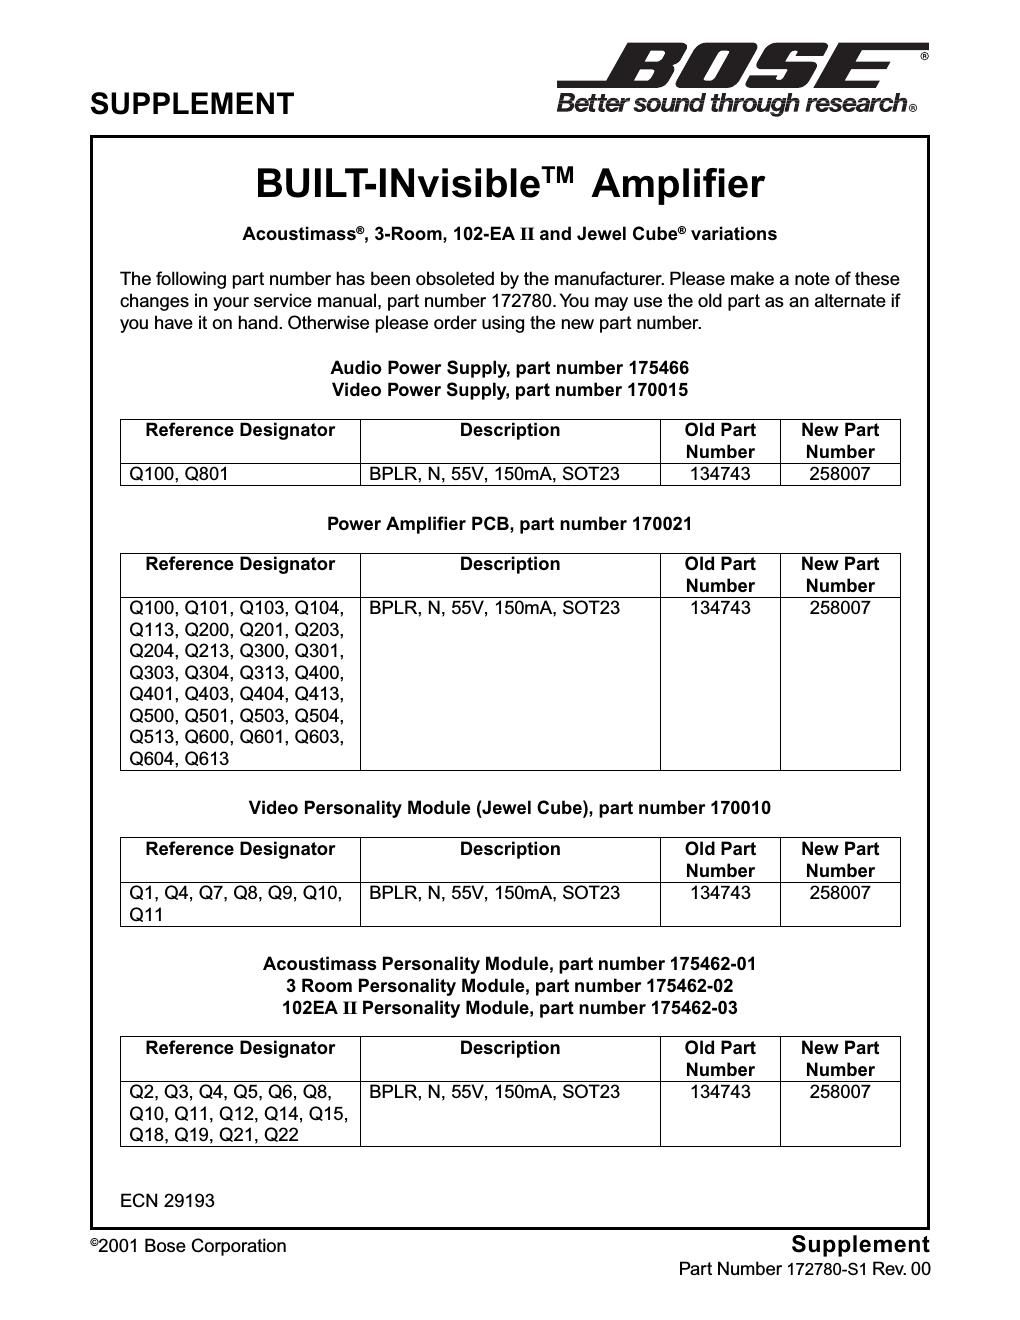 bose built invisible amplifier service manual s1